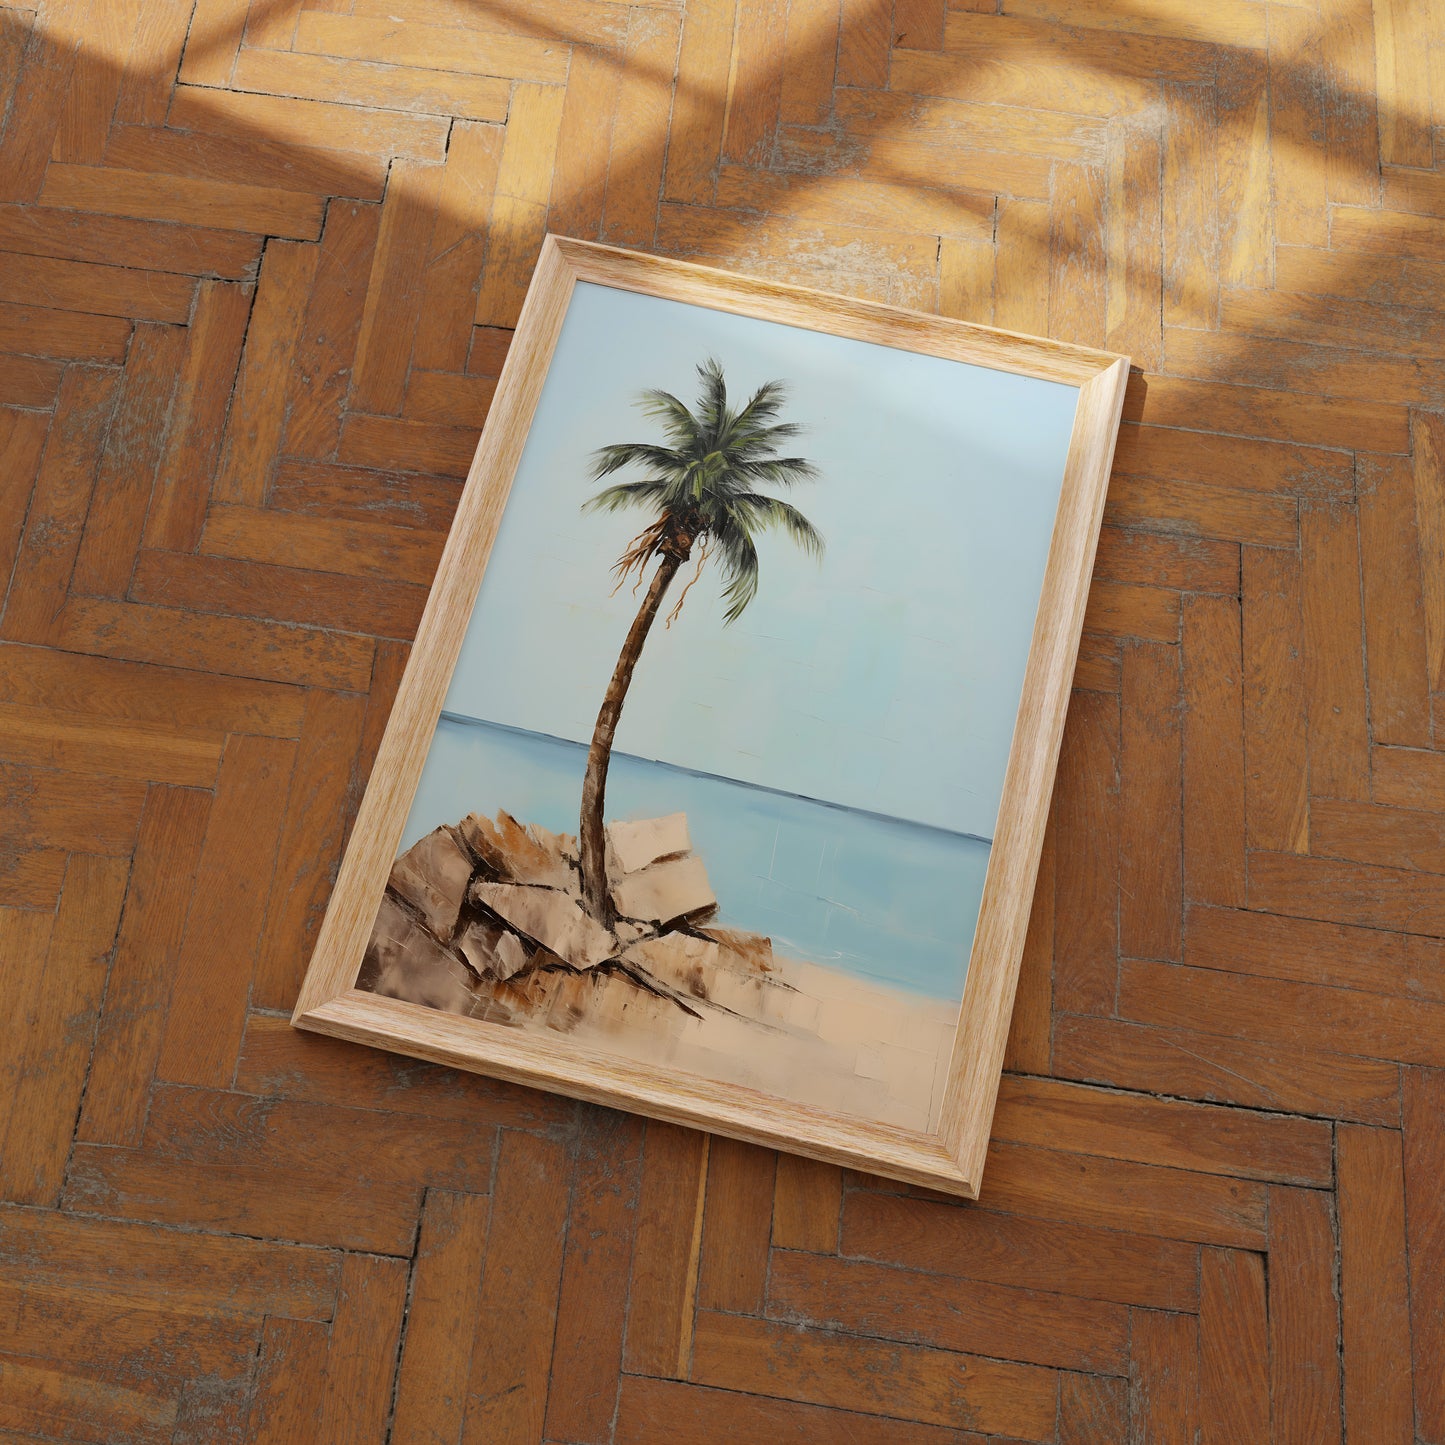 A framed picture of a palm tree on a wooden parquet floor.